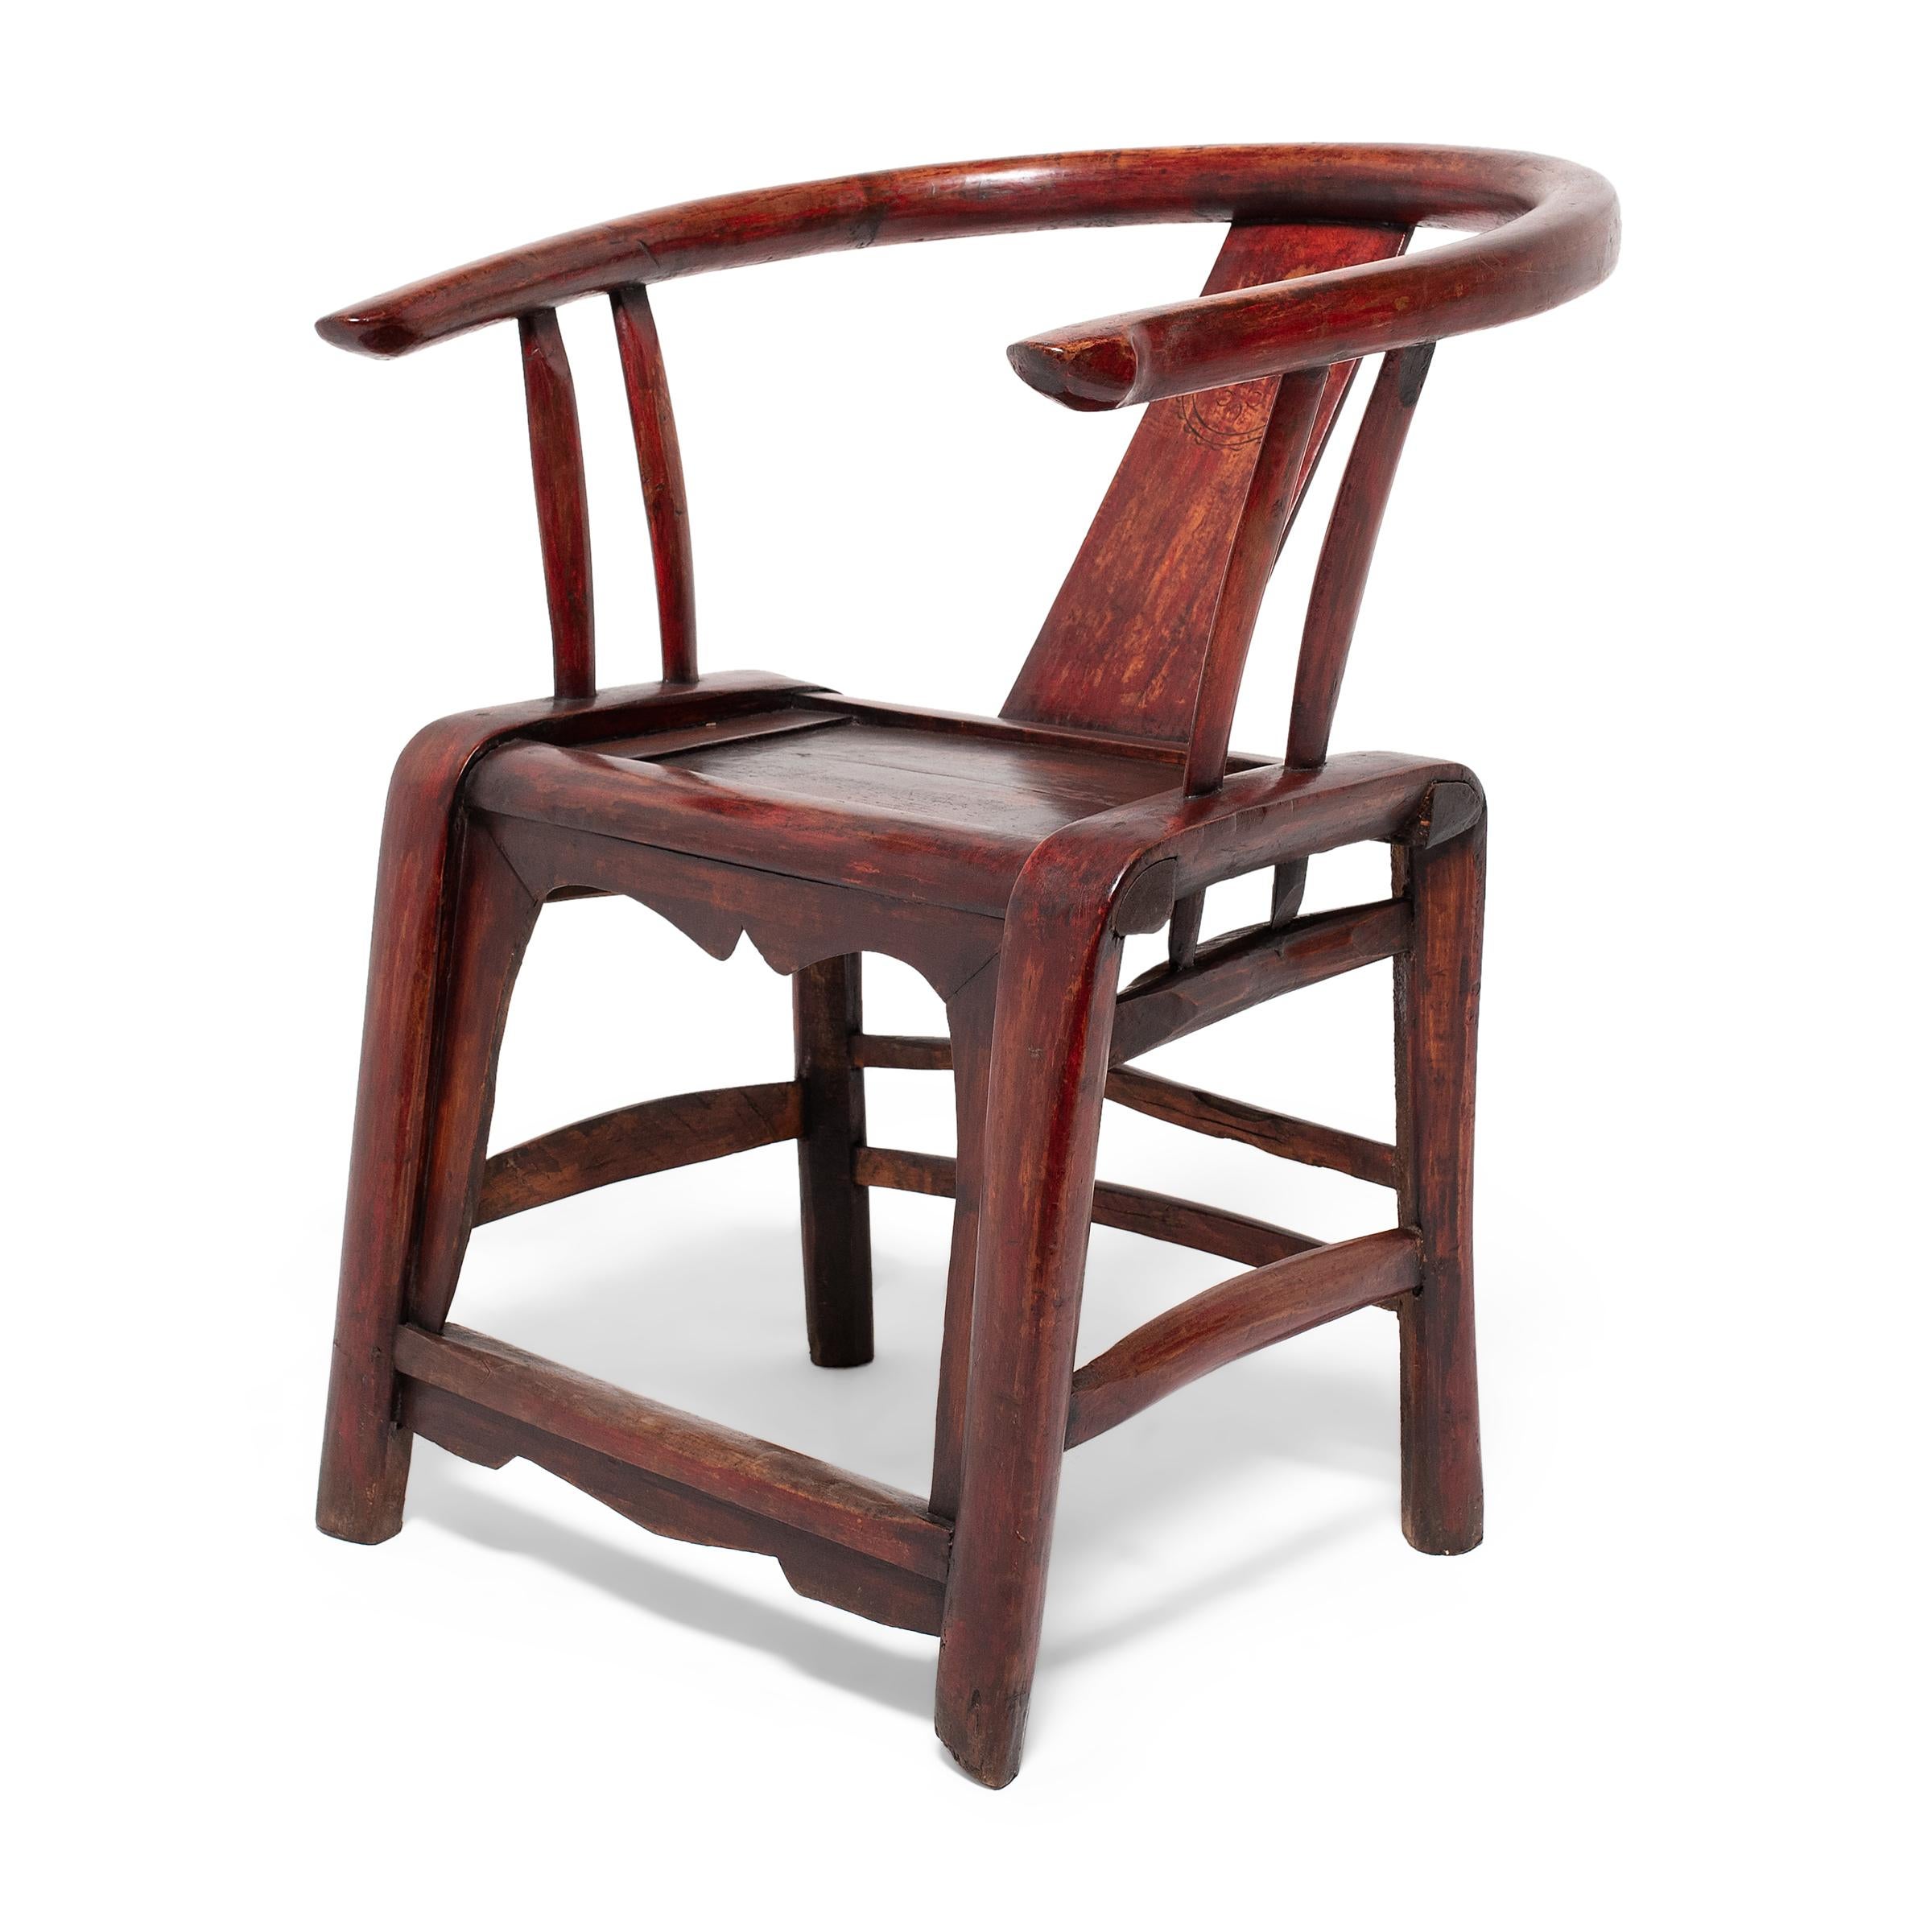 Qing Chinese Red Lacquer Roundback Chair, c. 1850 For Sale